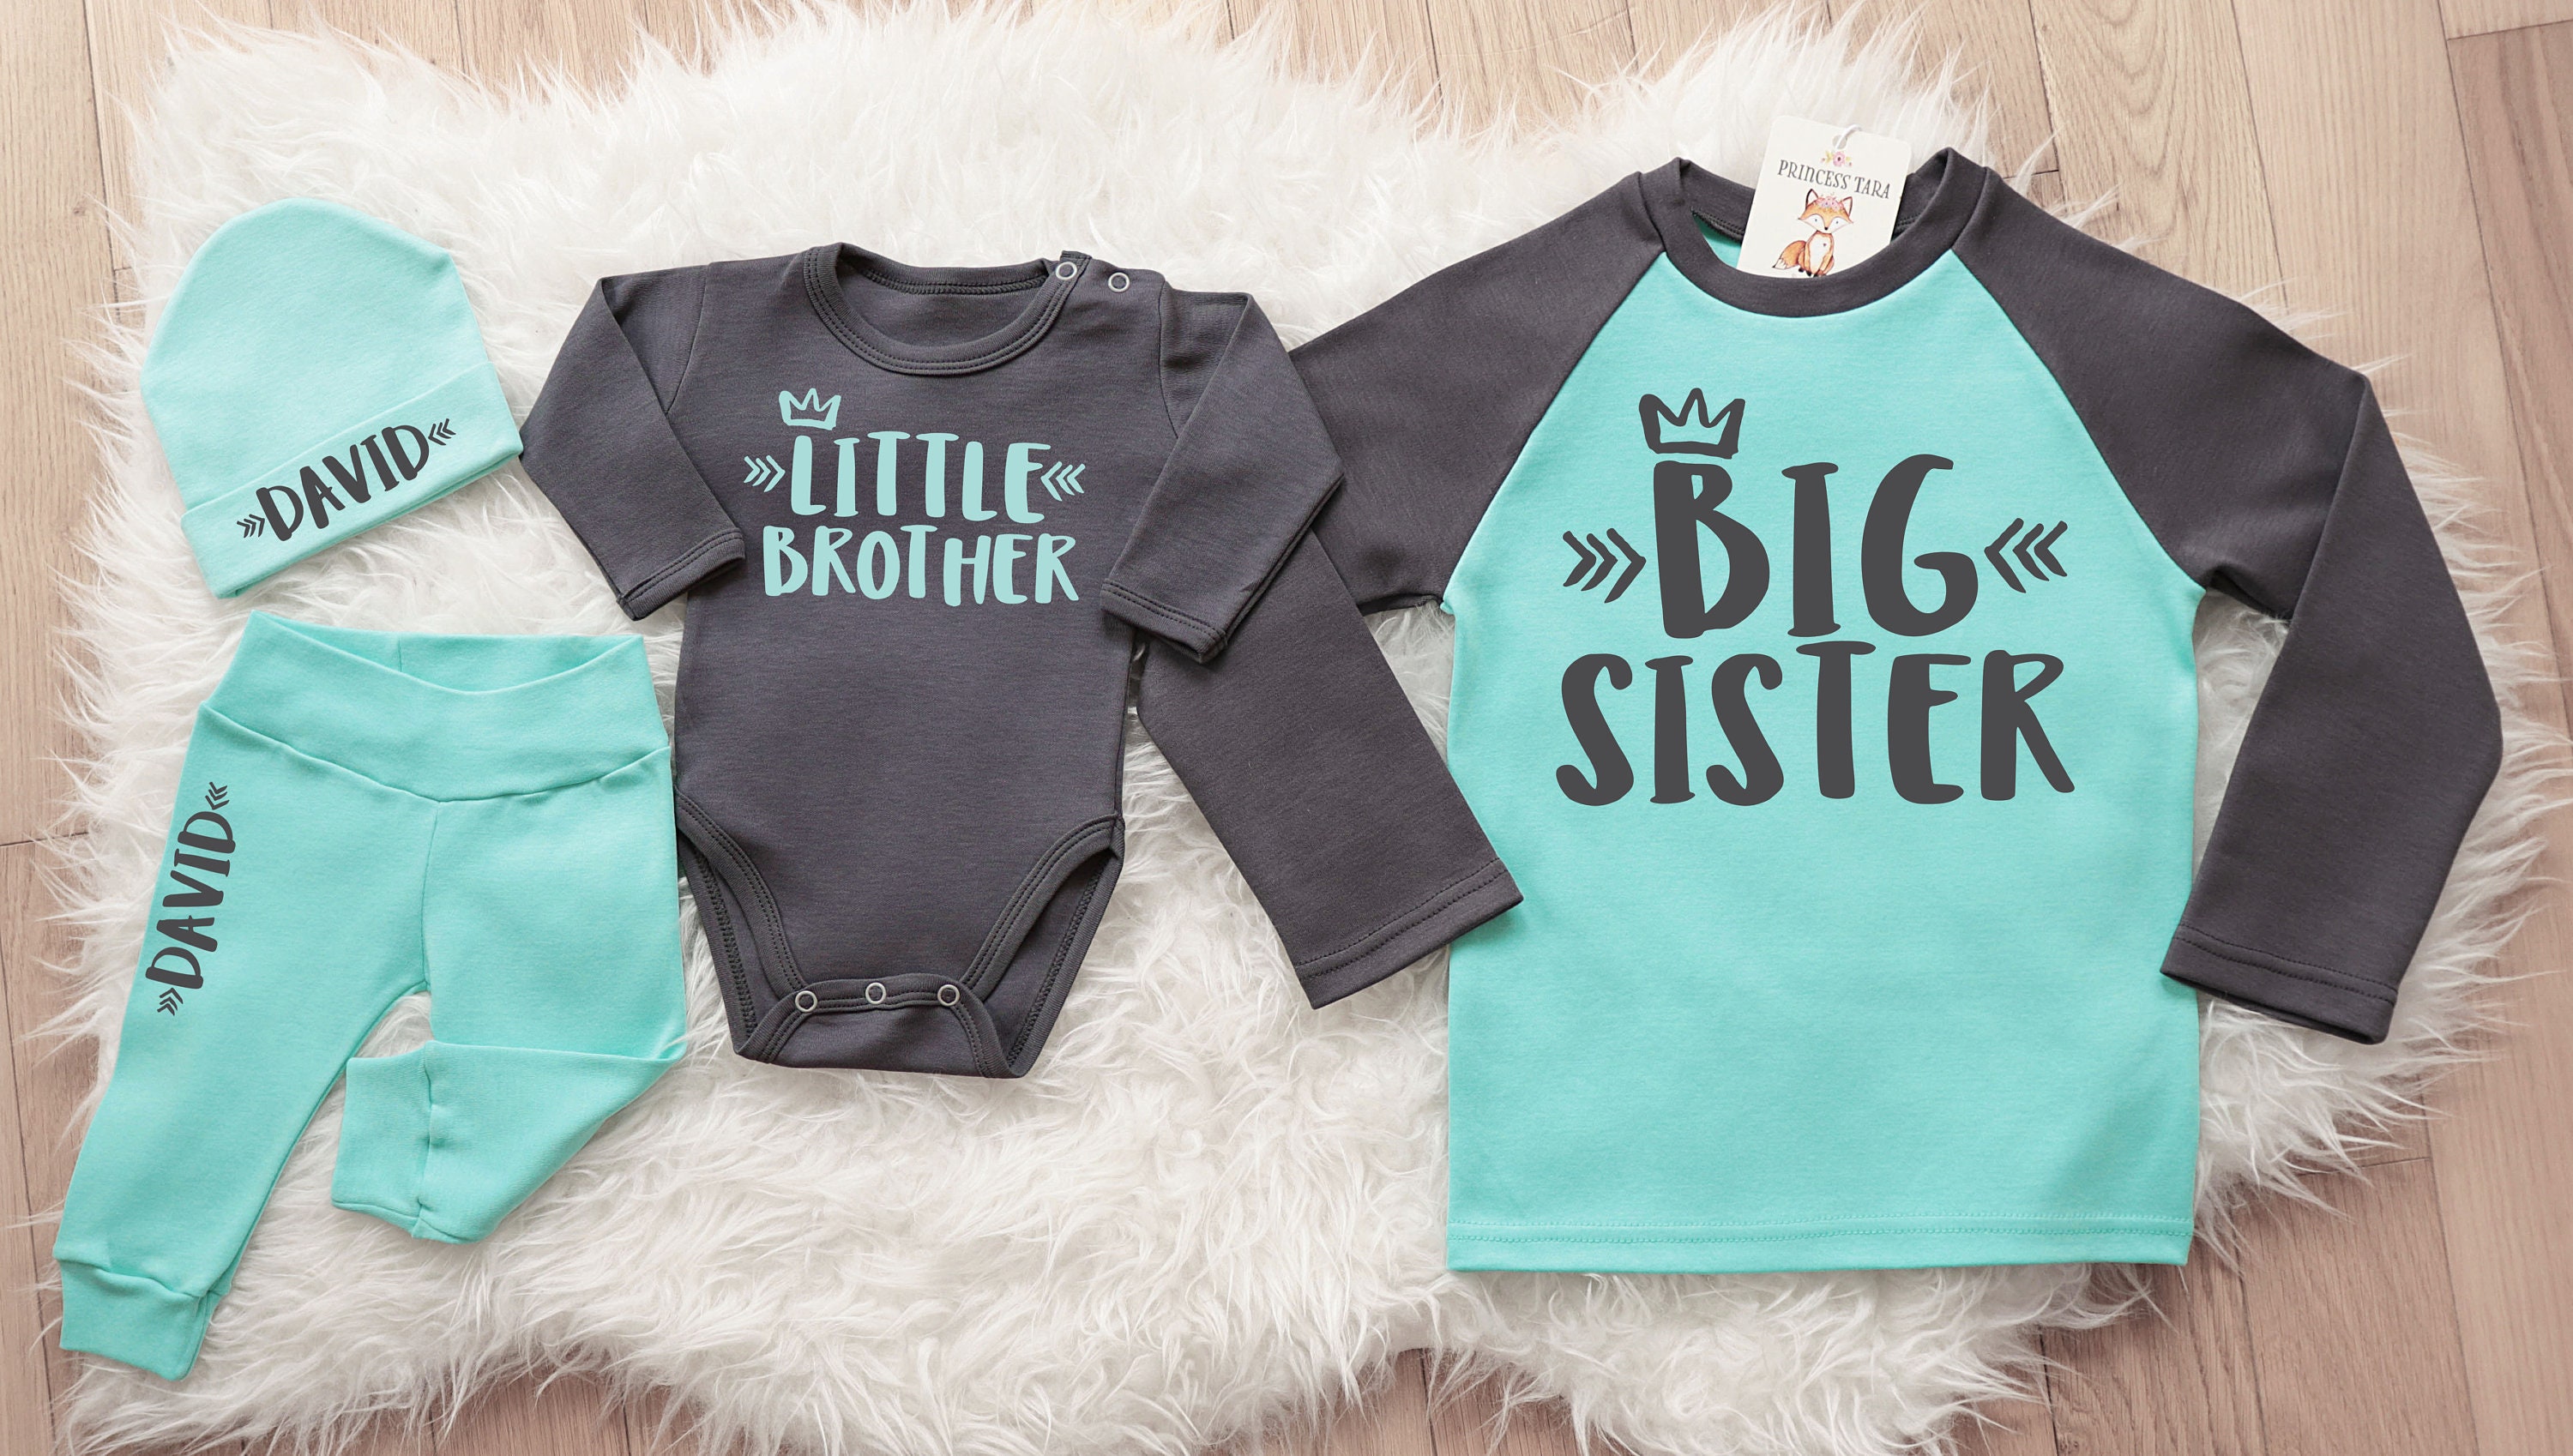 Big Brother Little Sister Navy Blue T-Shirt, Sis & Bro Matching Outfits